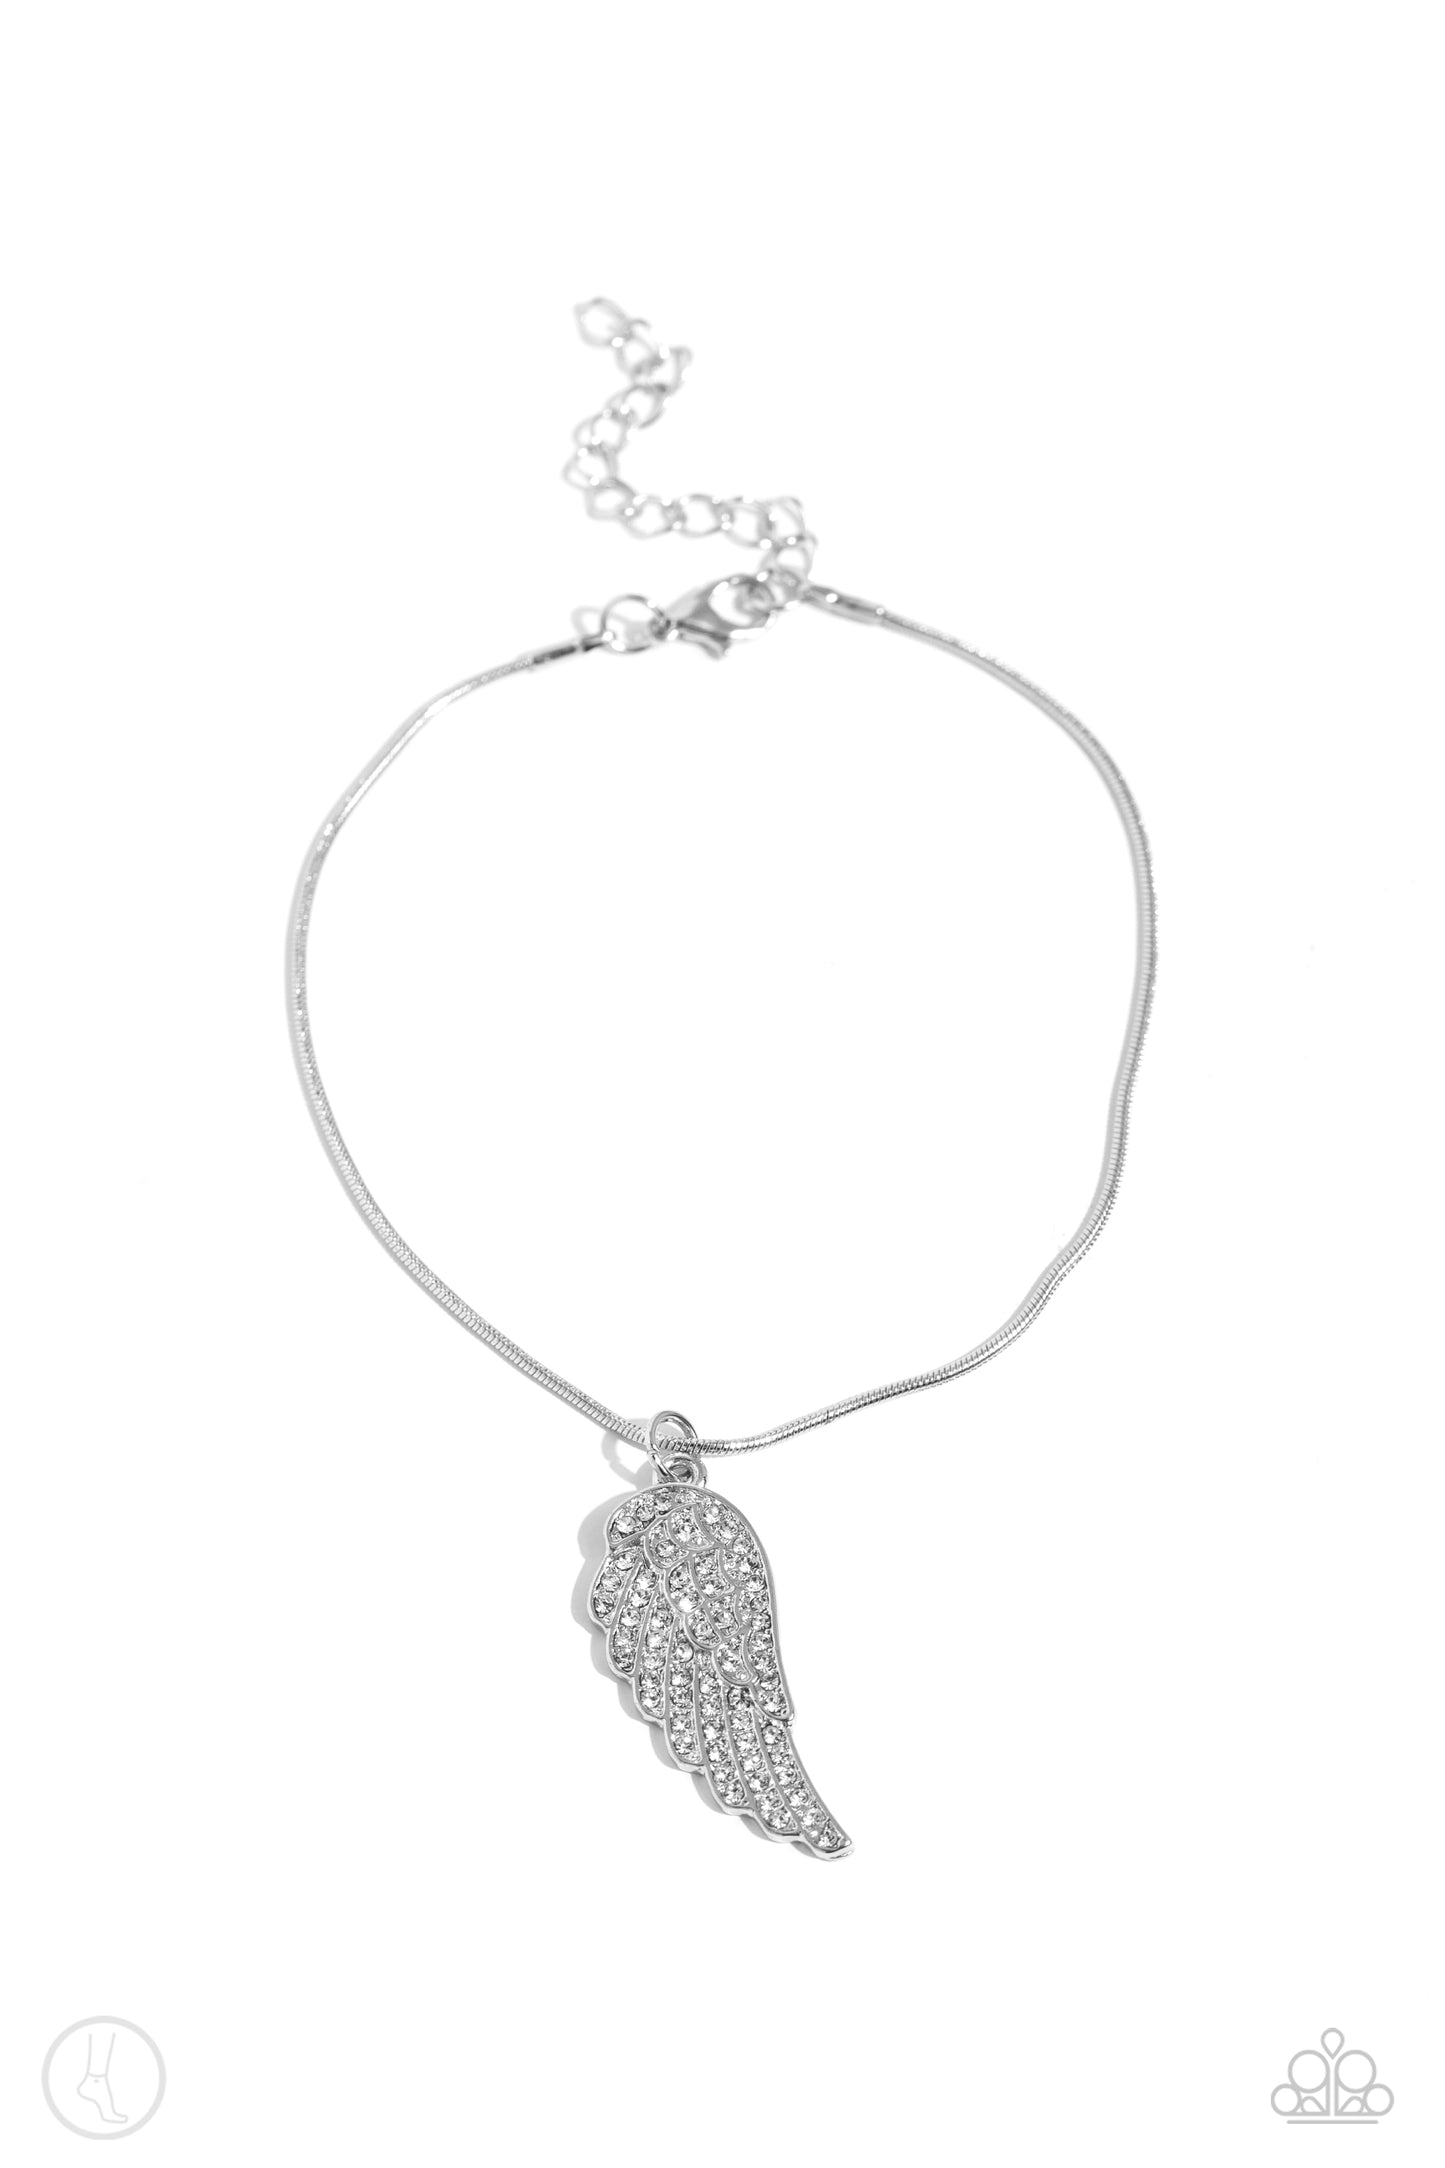 Paparazzi Accessories - Angelic Accent - White Anklet an angelic silver half-wing pendant delicately wraps around the ankle on a silver snake chain. Rows of dainty white rhinestones adorn the winged accents, adding a celestial shimmer to the angelic centerpiece. Features an adjustable clasp closure.  Sold as one individual anklet.